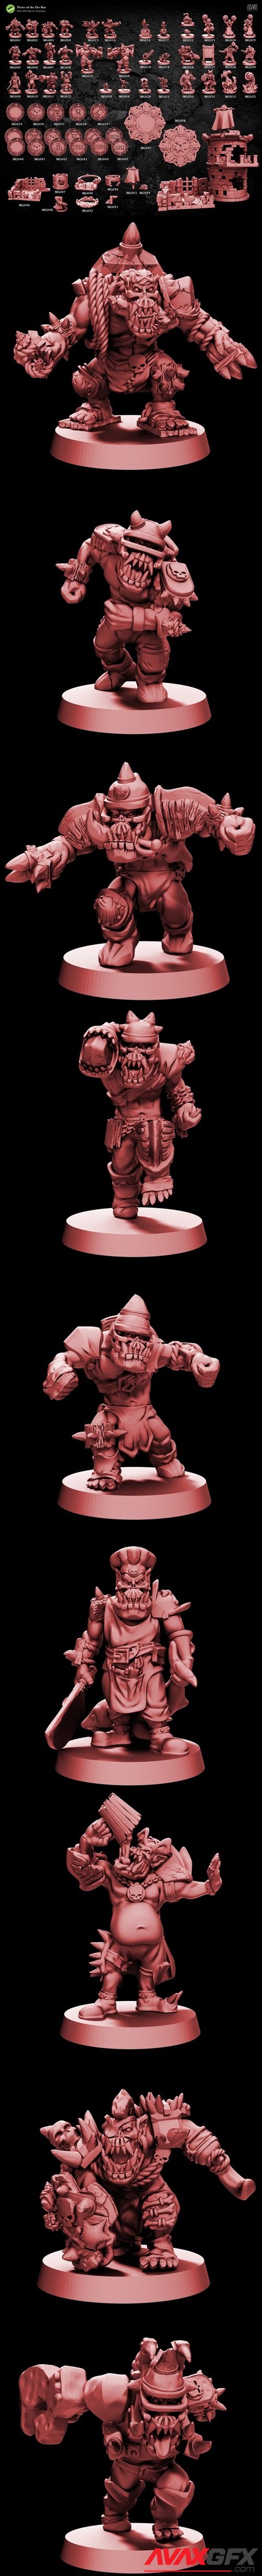 Pirate of the orc bay – 3D Printable STL